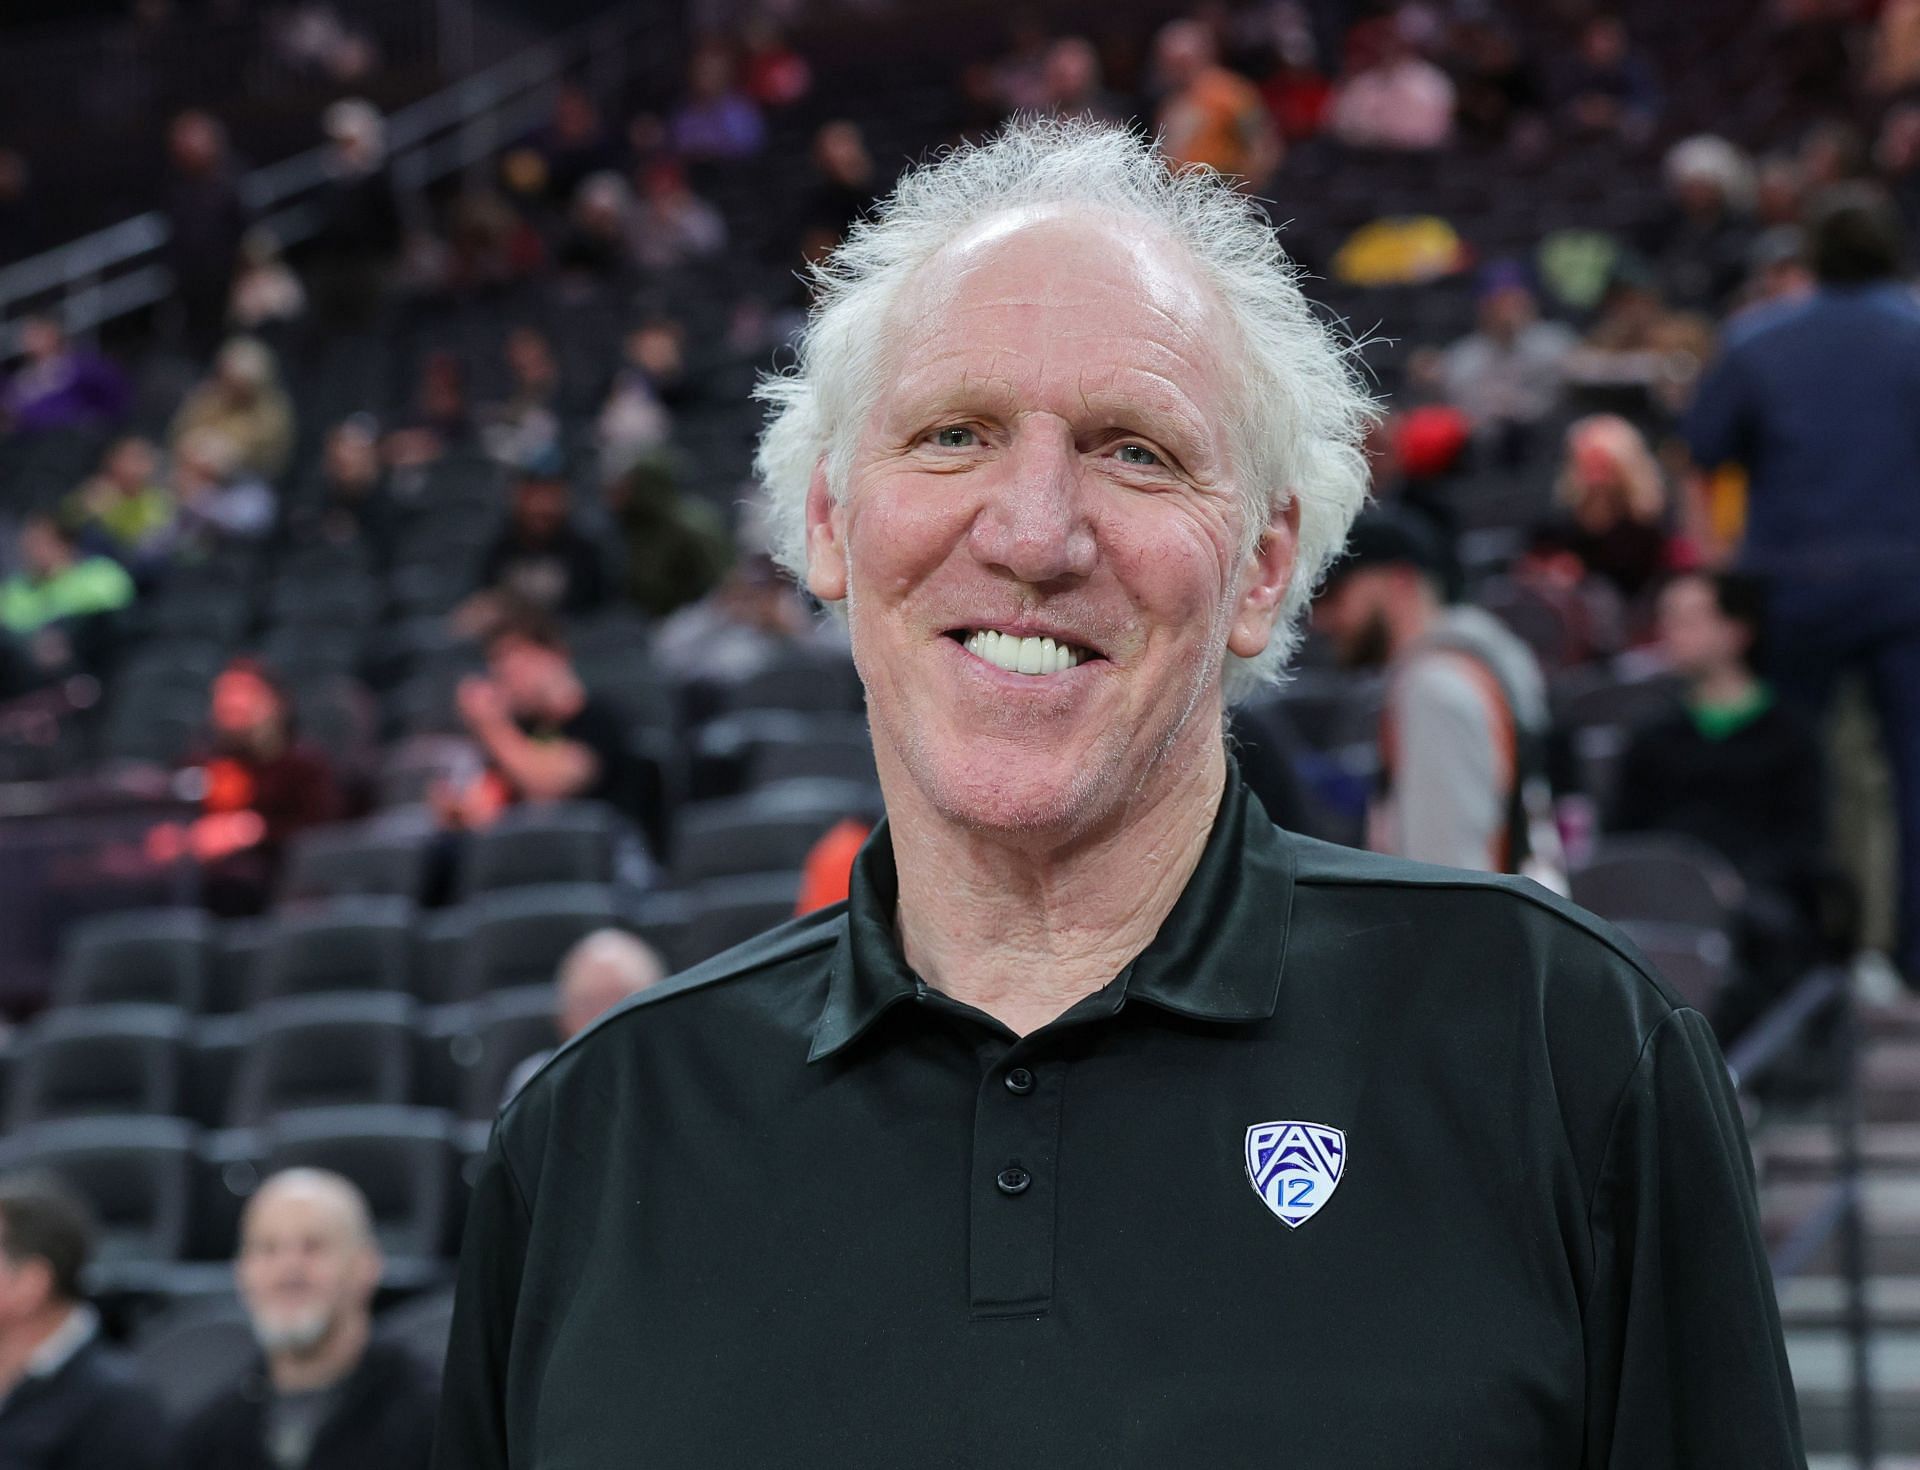 Bill Walton is one of only three players to win the Naismith Player of the Year Award multiple times.